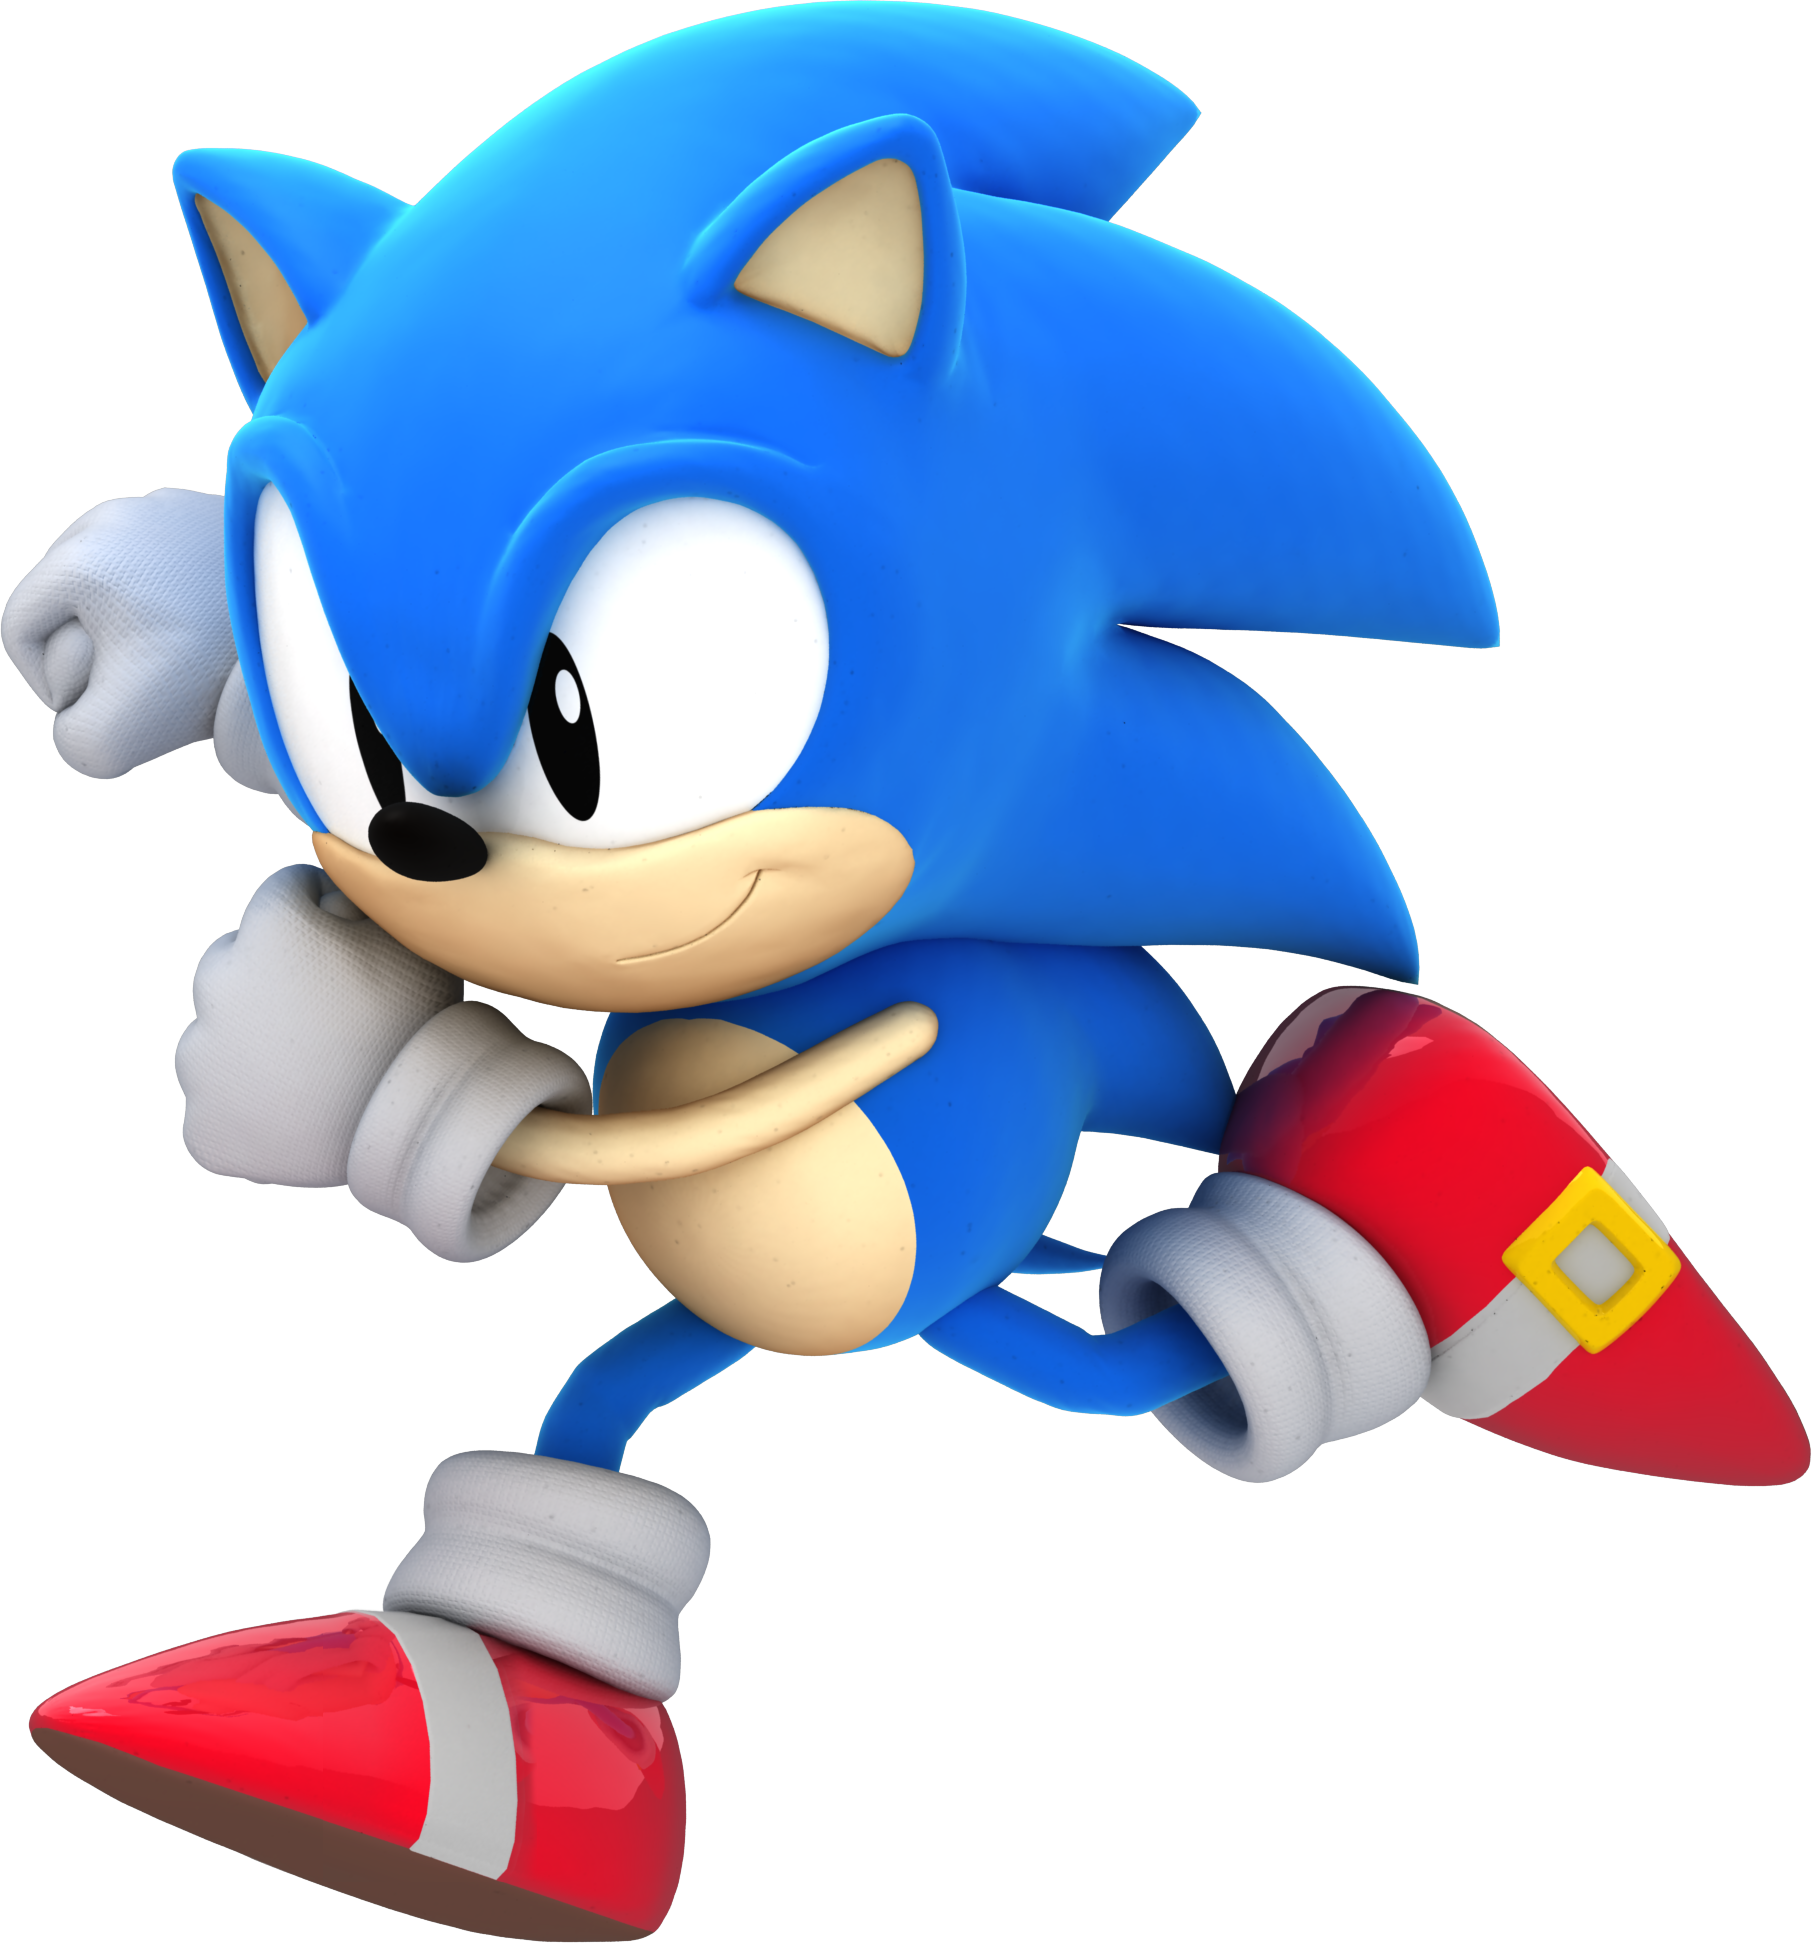 another_classic_sonic_render_by_alsyouri2001-dasito3.png